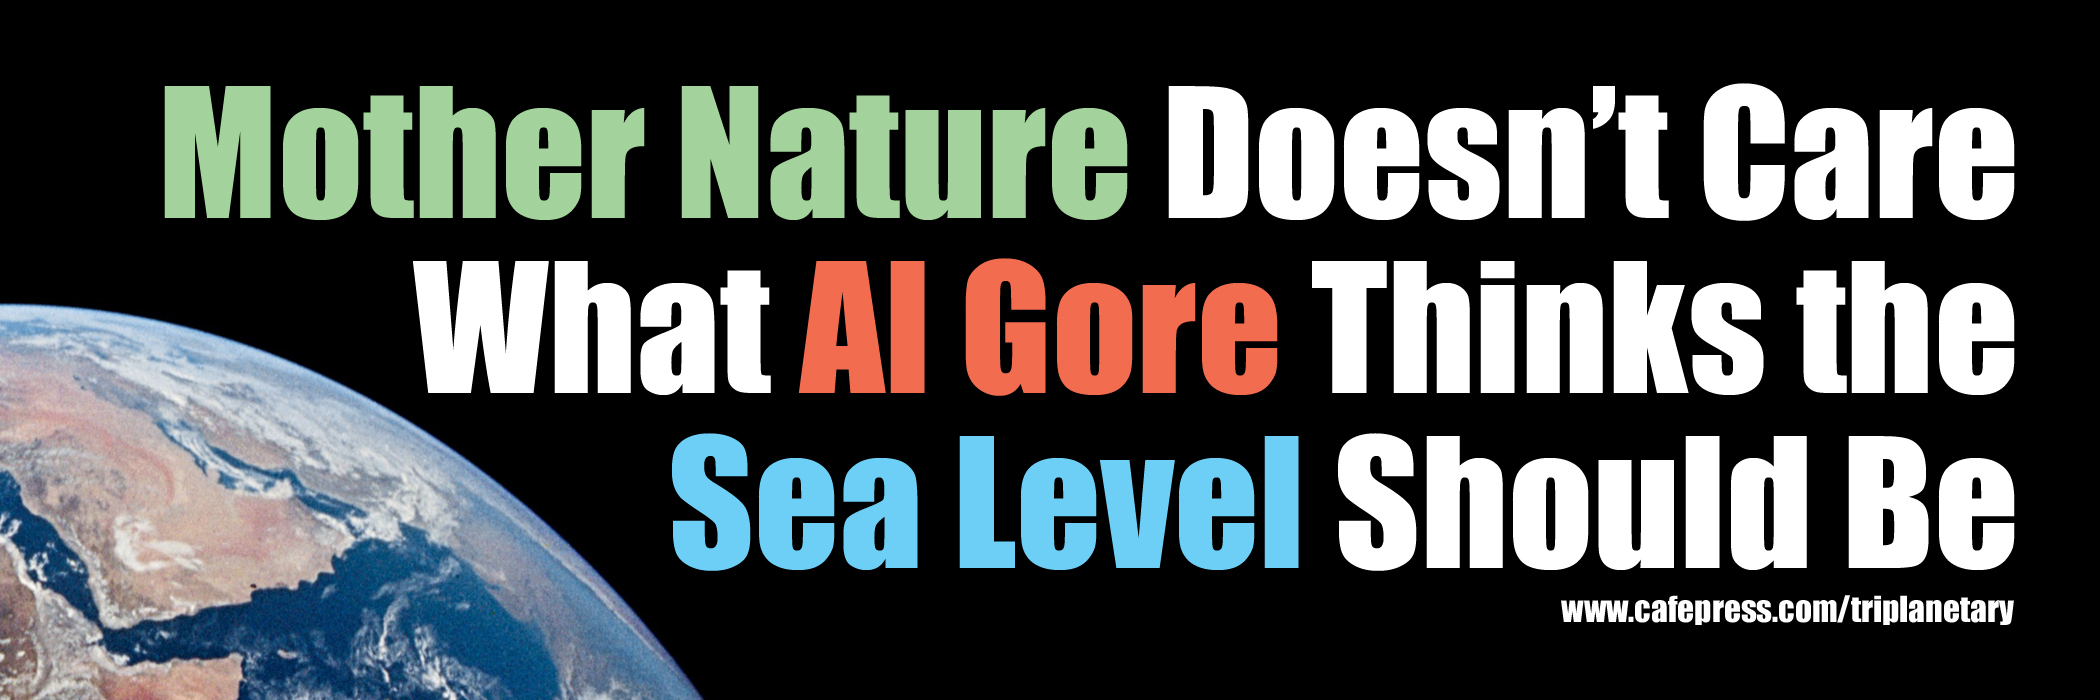 Black and white image of bumper sticker: 'Mother Nature Doesn't Care What Al Gore Thinks the Seal Level Should Be'